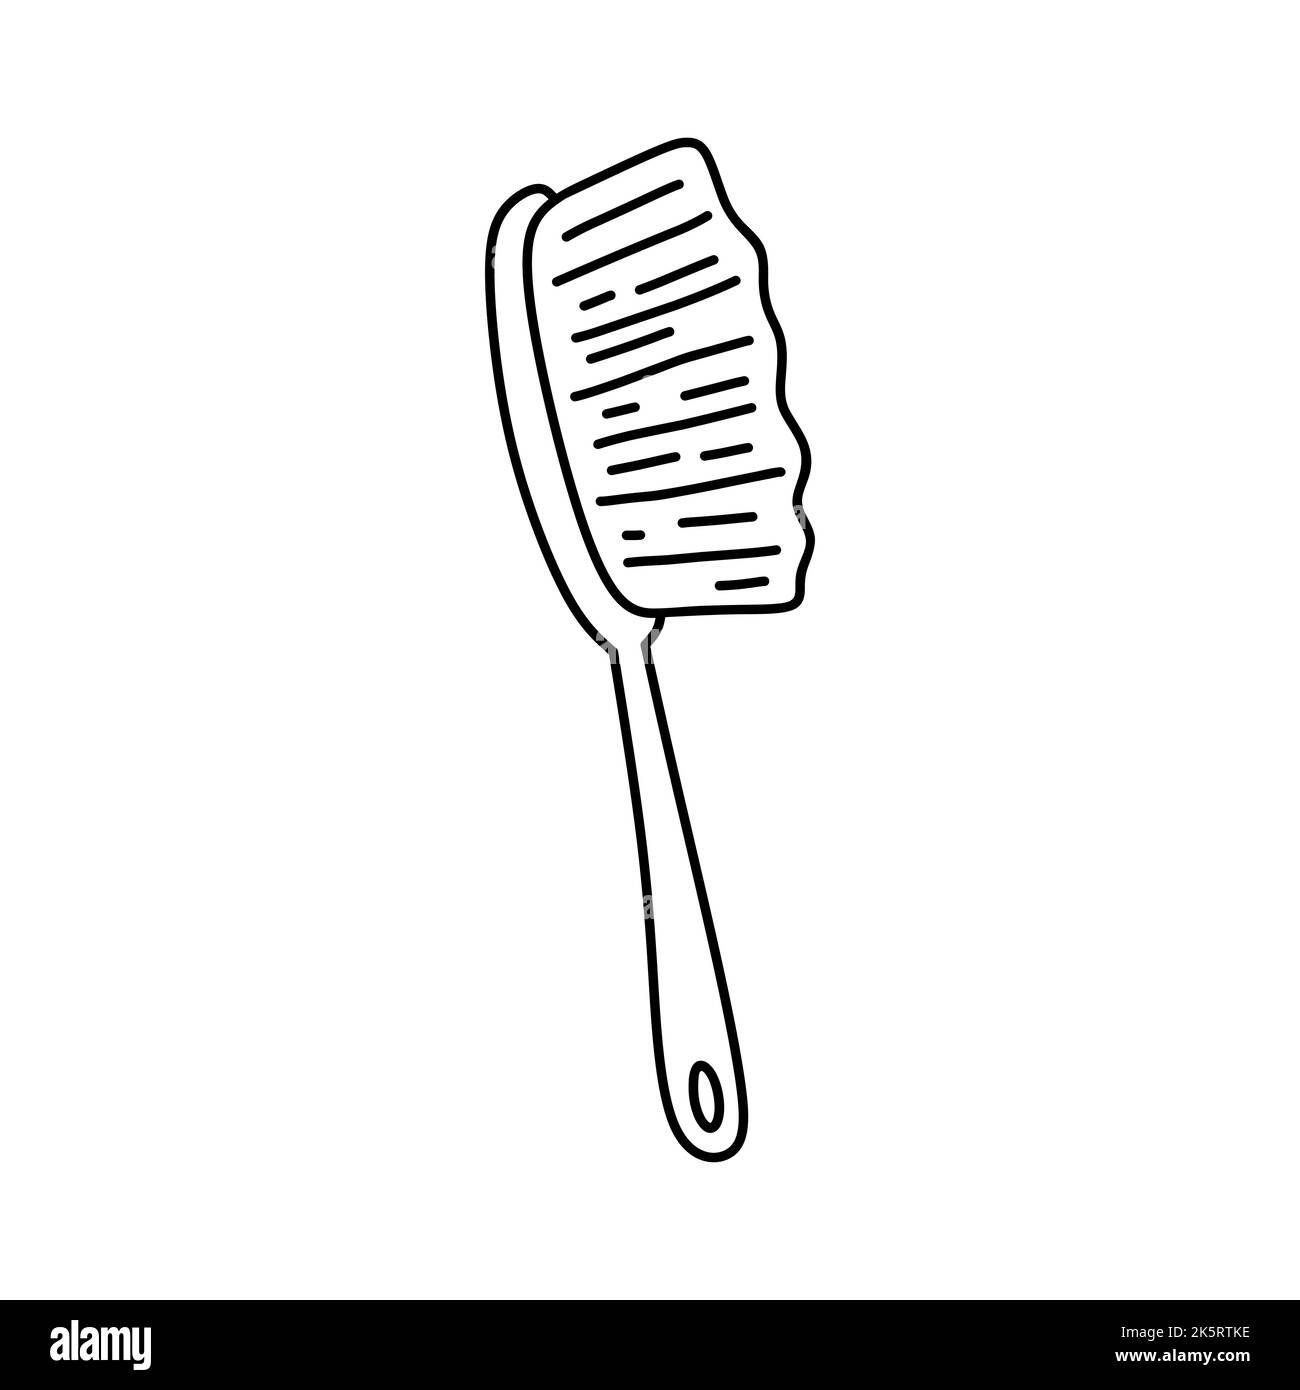 Dry body brush isolated on white background. Accessory for washing, personal hygiene, skincare. Vector hand-drawn illustration in doodle style. Stock Vector